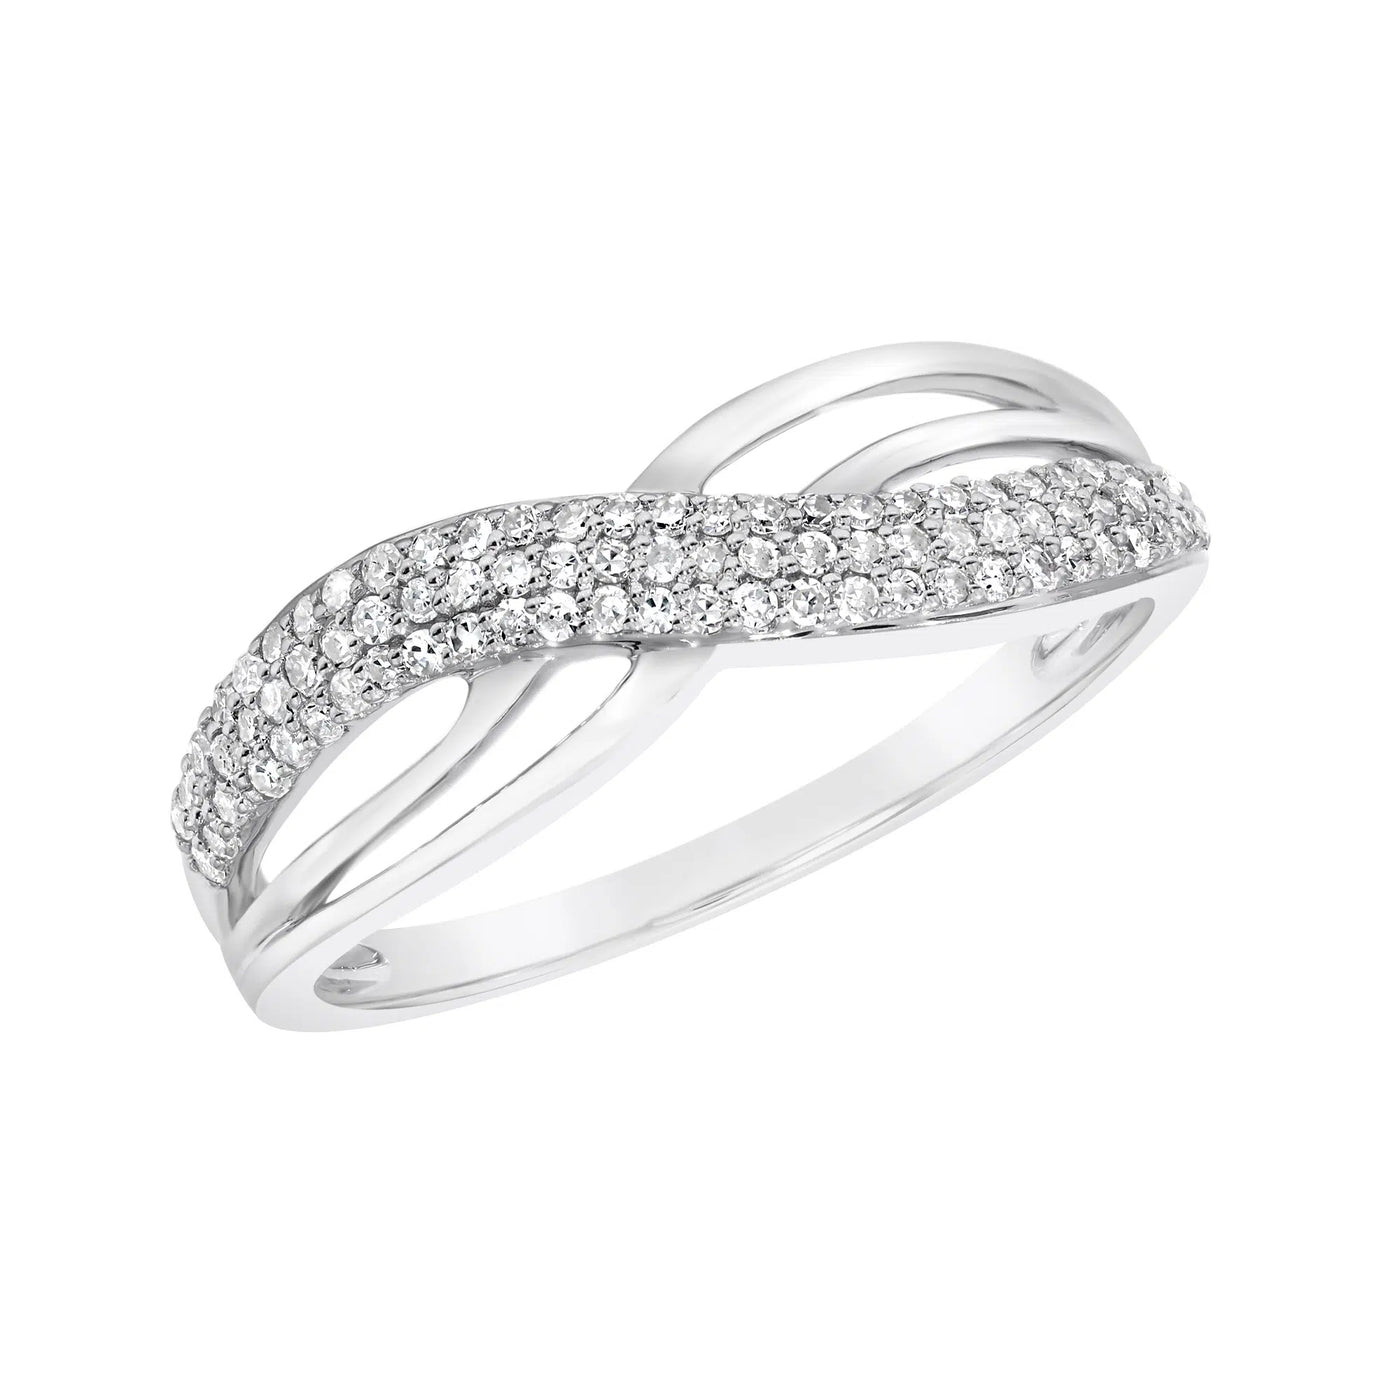 9ct White Gold Woven Triple Row Dress Ring Set With 1/4ct Diamonds